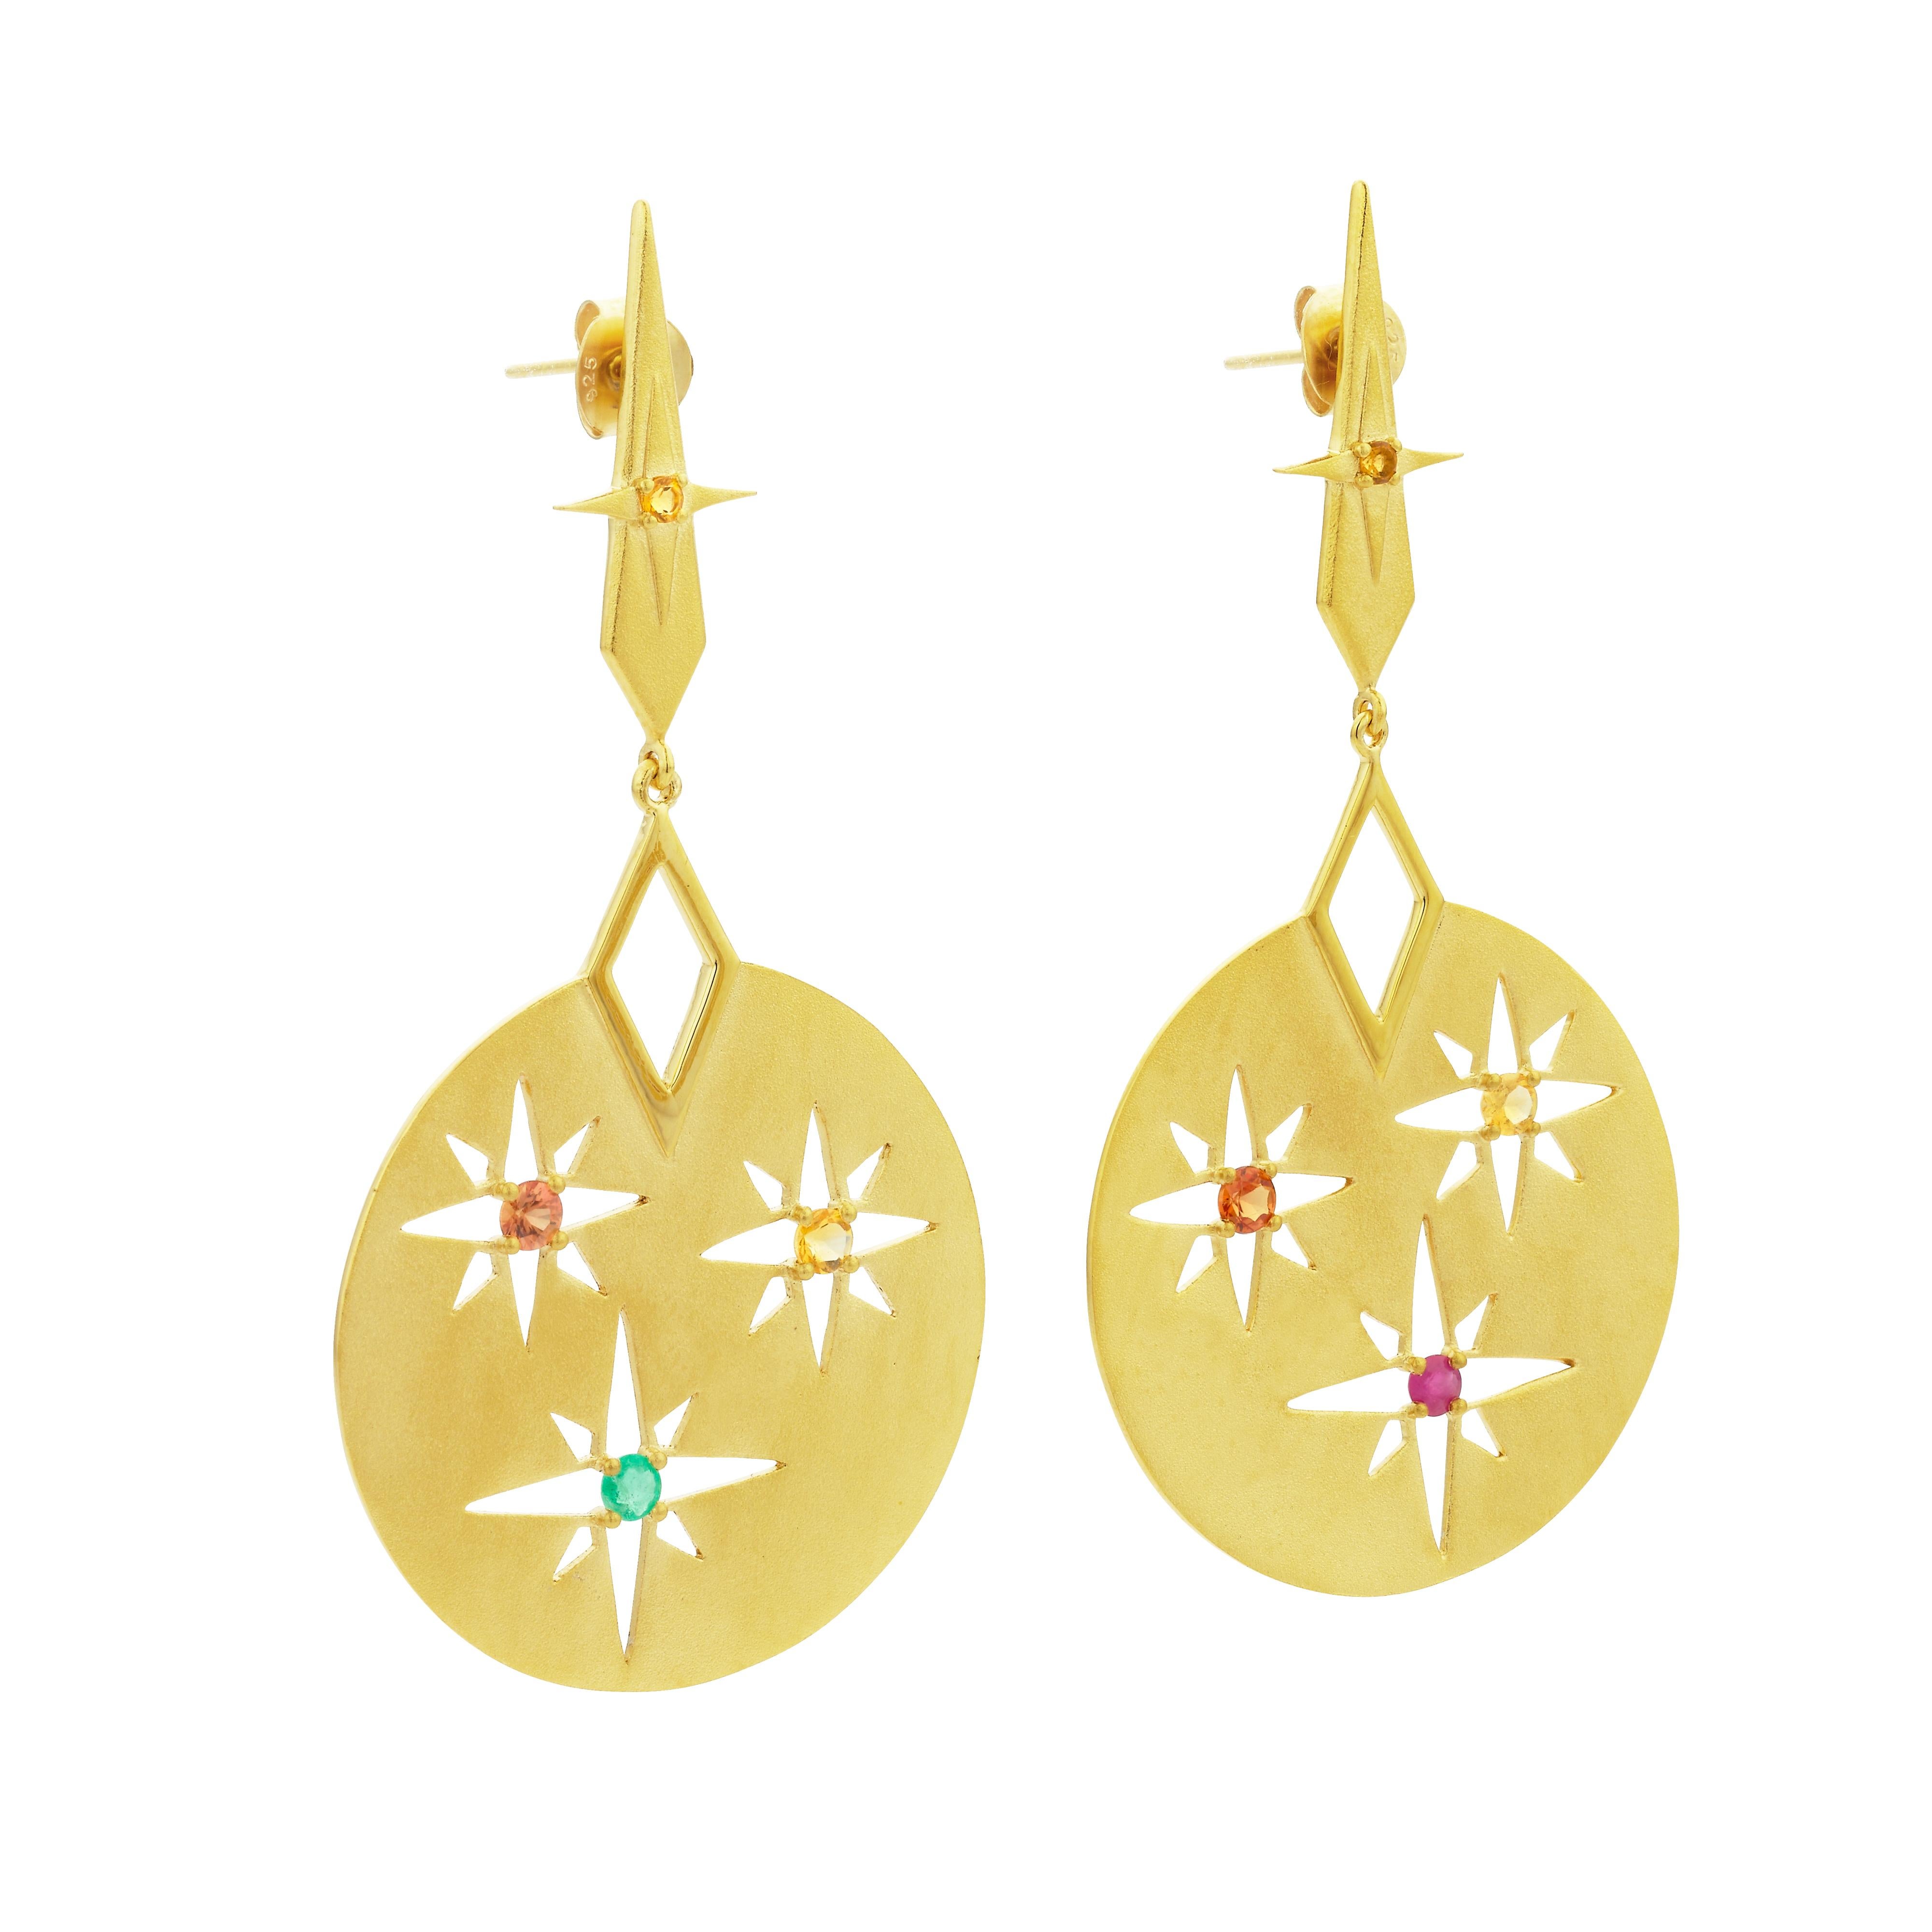 The Rising Sun earrings hold the spectrum of colours of the rising sun.
The stud set with Citrine sits high on the ear to reflect the sun at its highest point.

The elegant drop matte disk reveals the cut-out detailing of the sun with mismatched